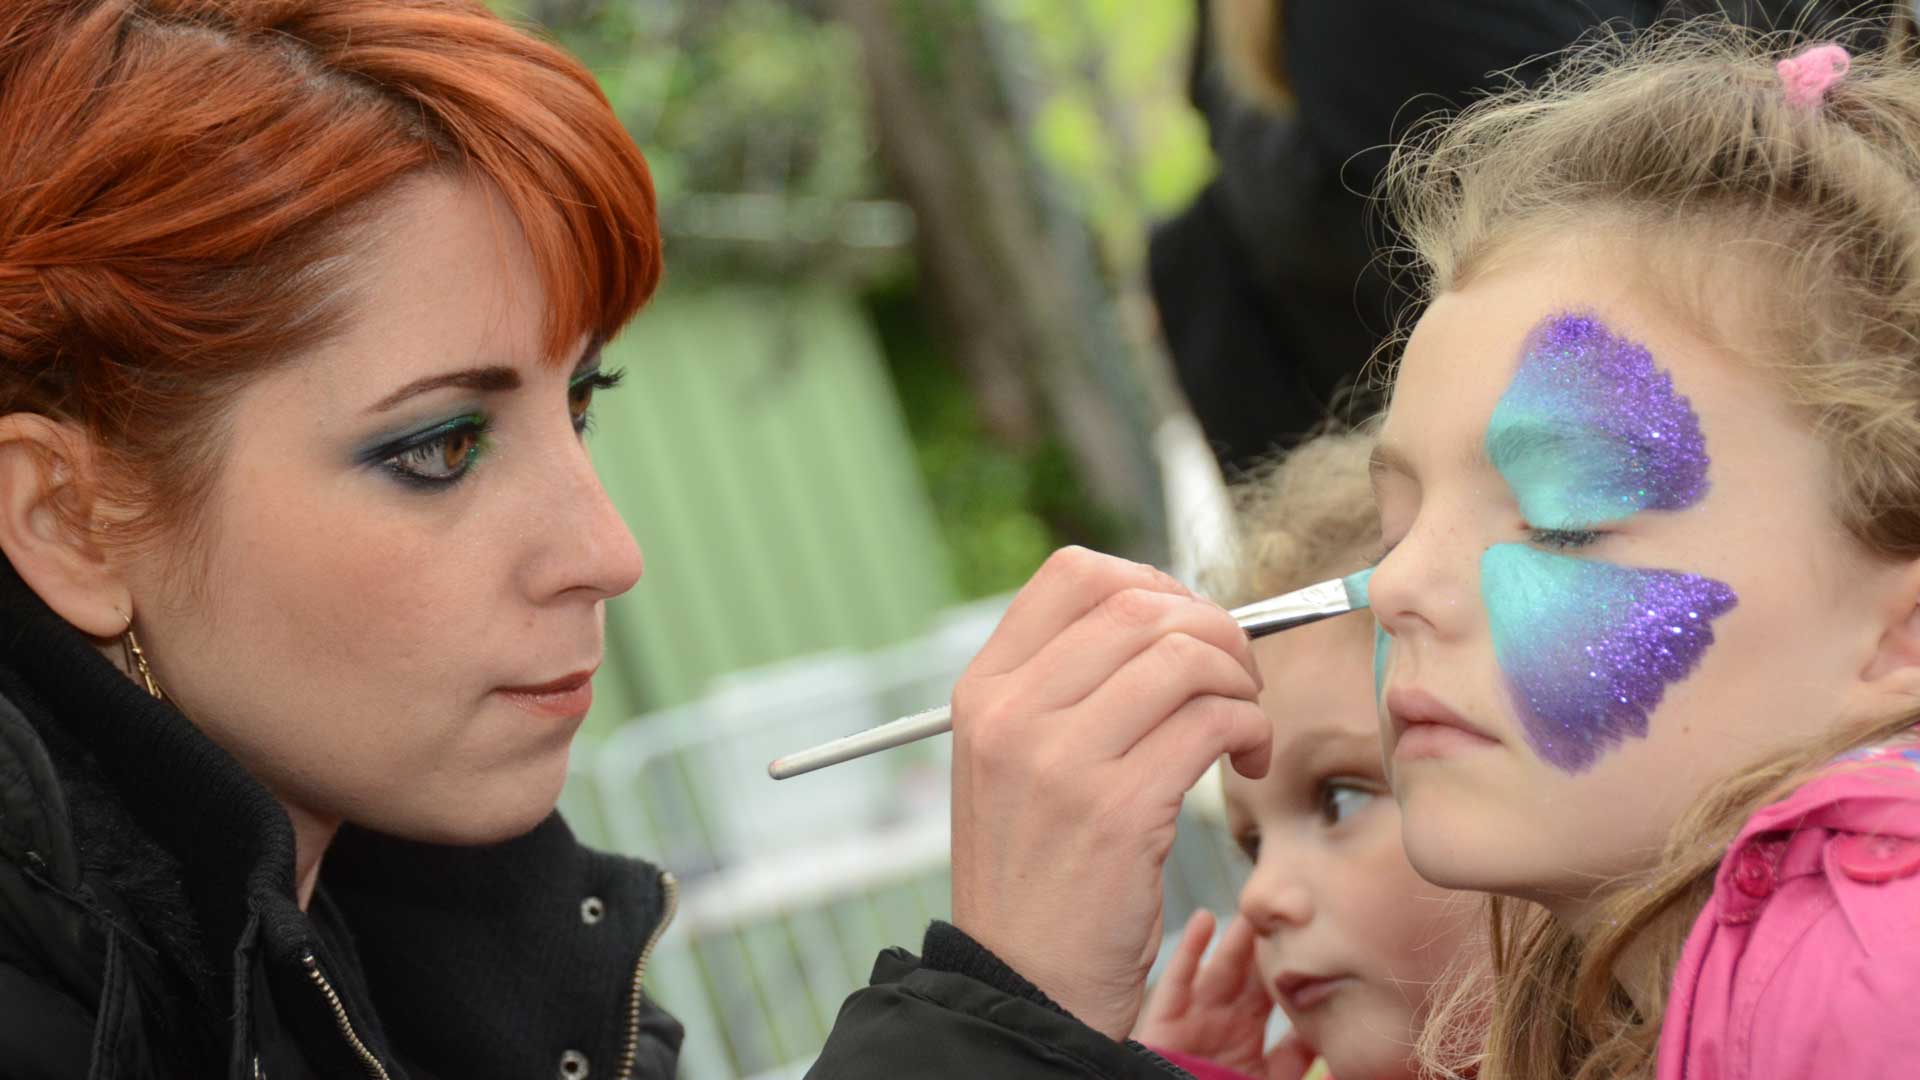 Maquillage enfant - Alicia maquilleuse professionnelle - Cannes Nice Monaco  - Make-up artist